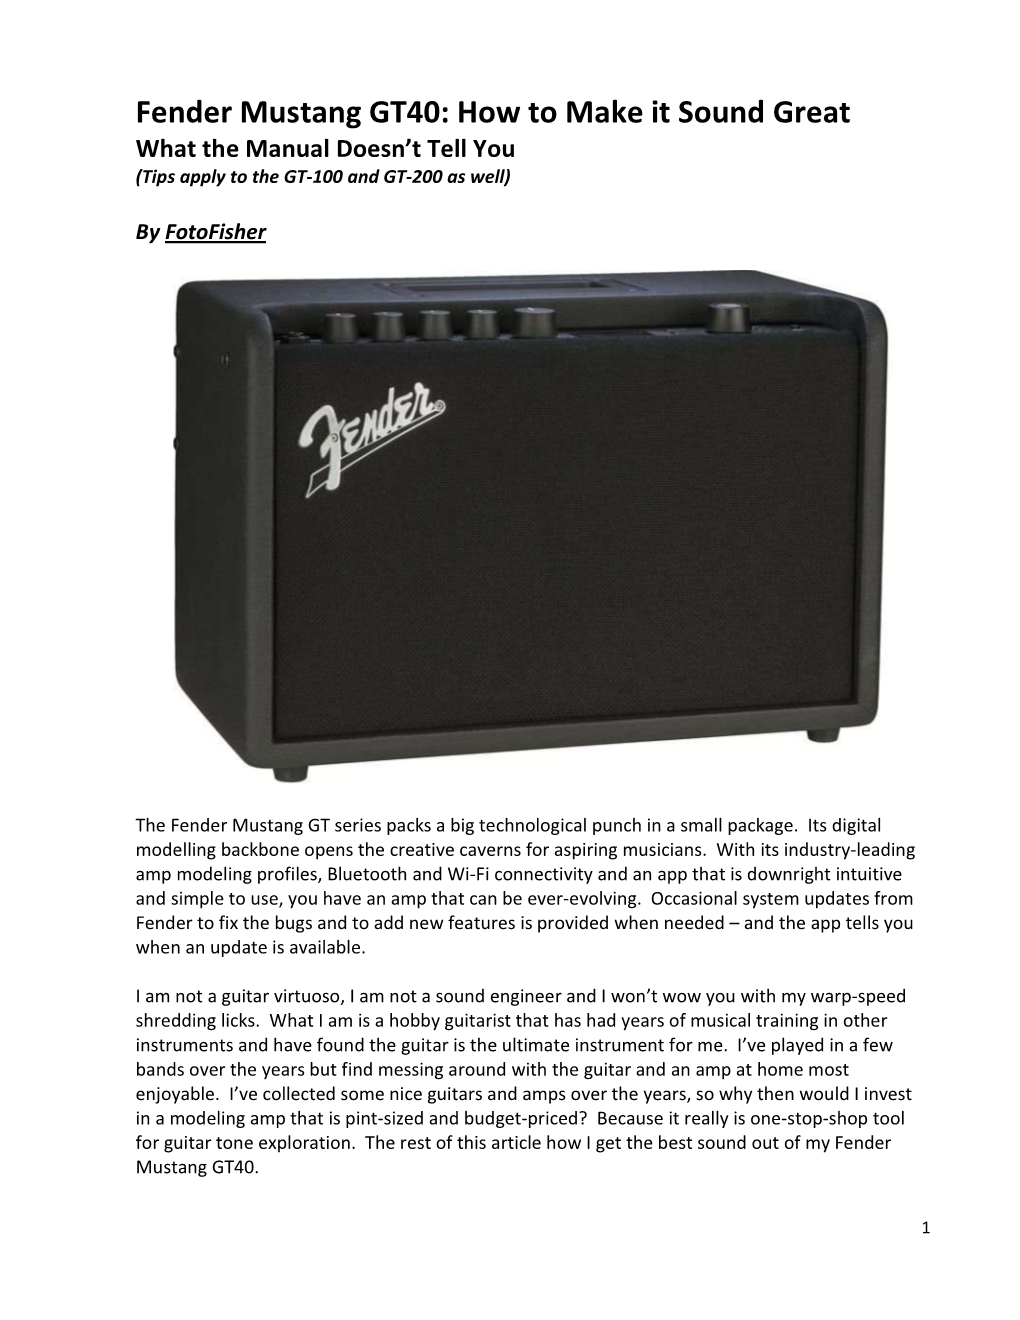 Fender Mustang GT40: How to Make It Sound Great What the Manual Doesn’T Tell You (Tips Apply to the GT-100 and GT-200 As Well)